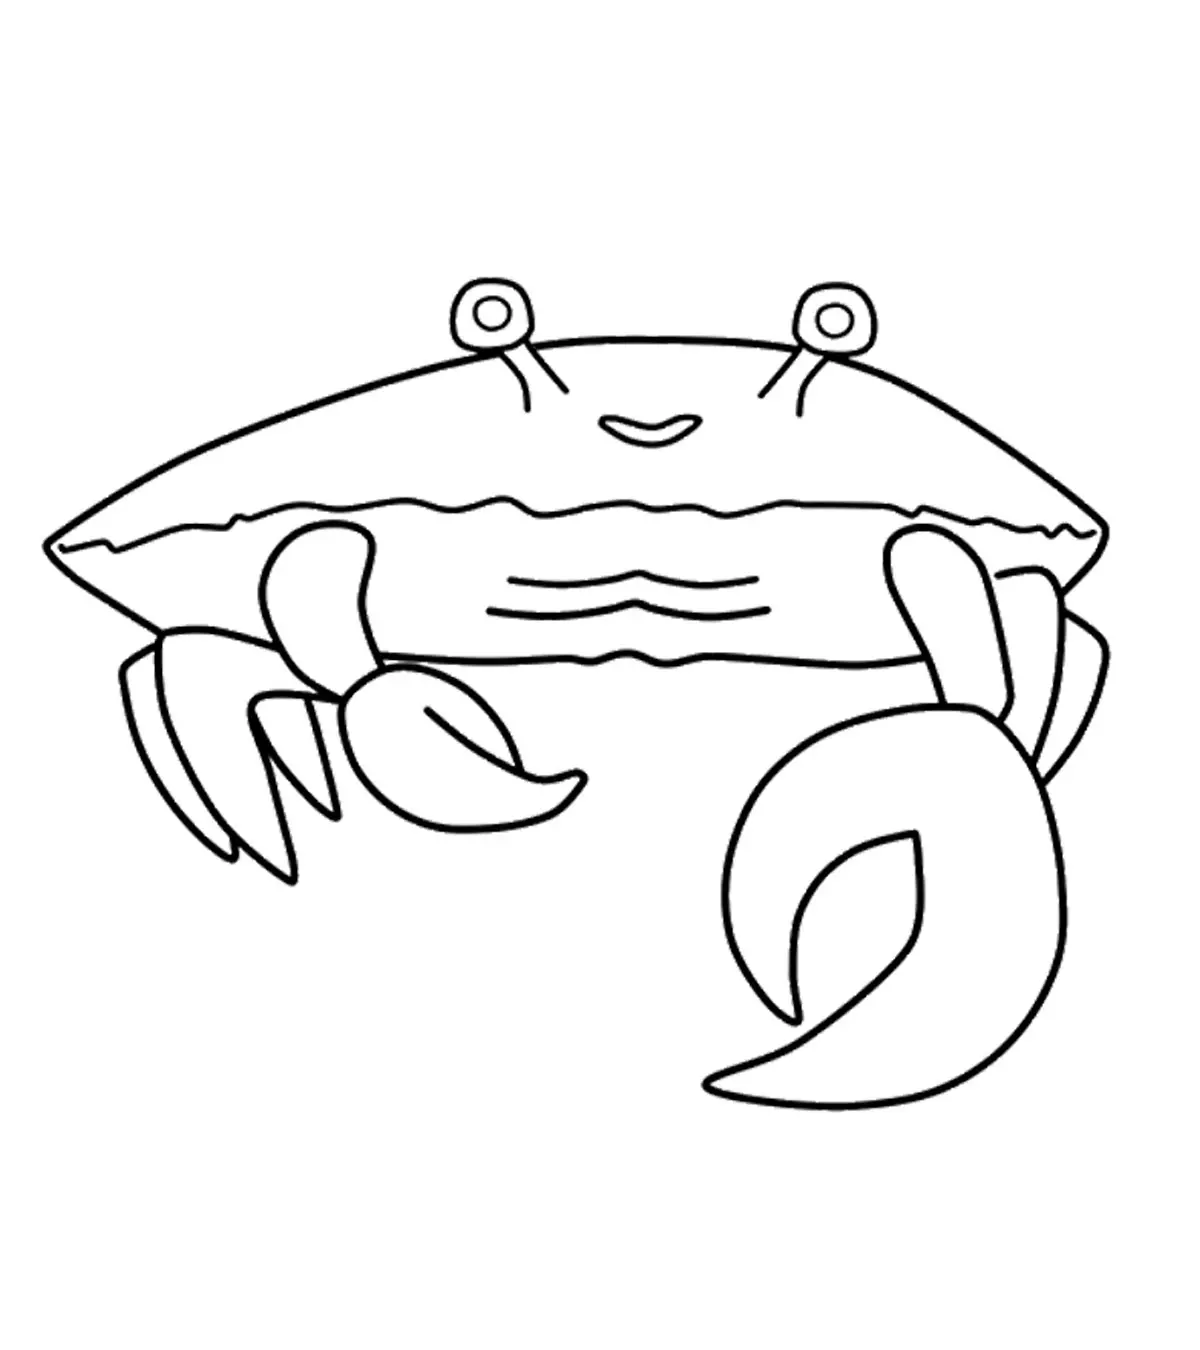 10 Amazing Crab Coloring Pages For Your Little Ones